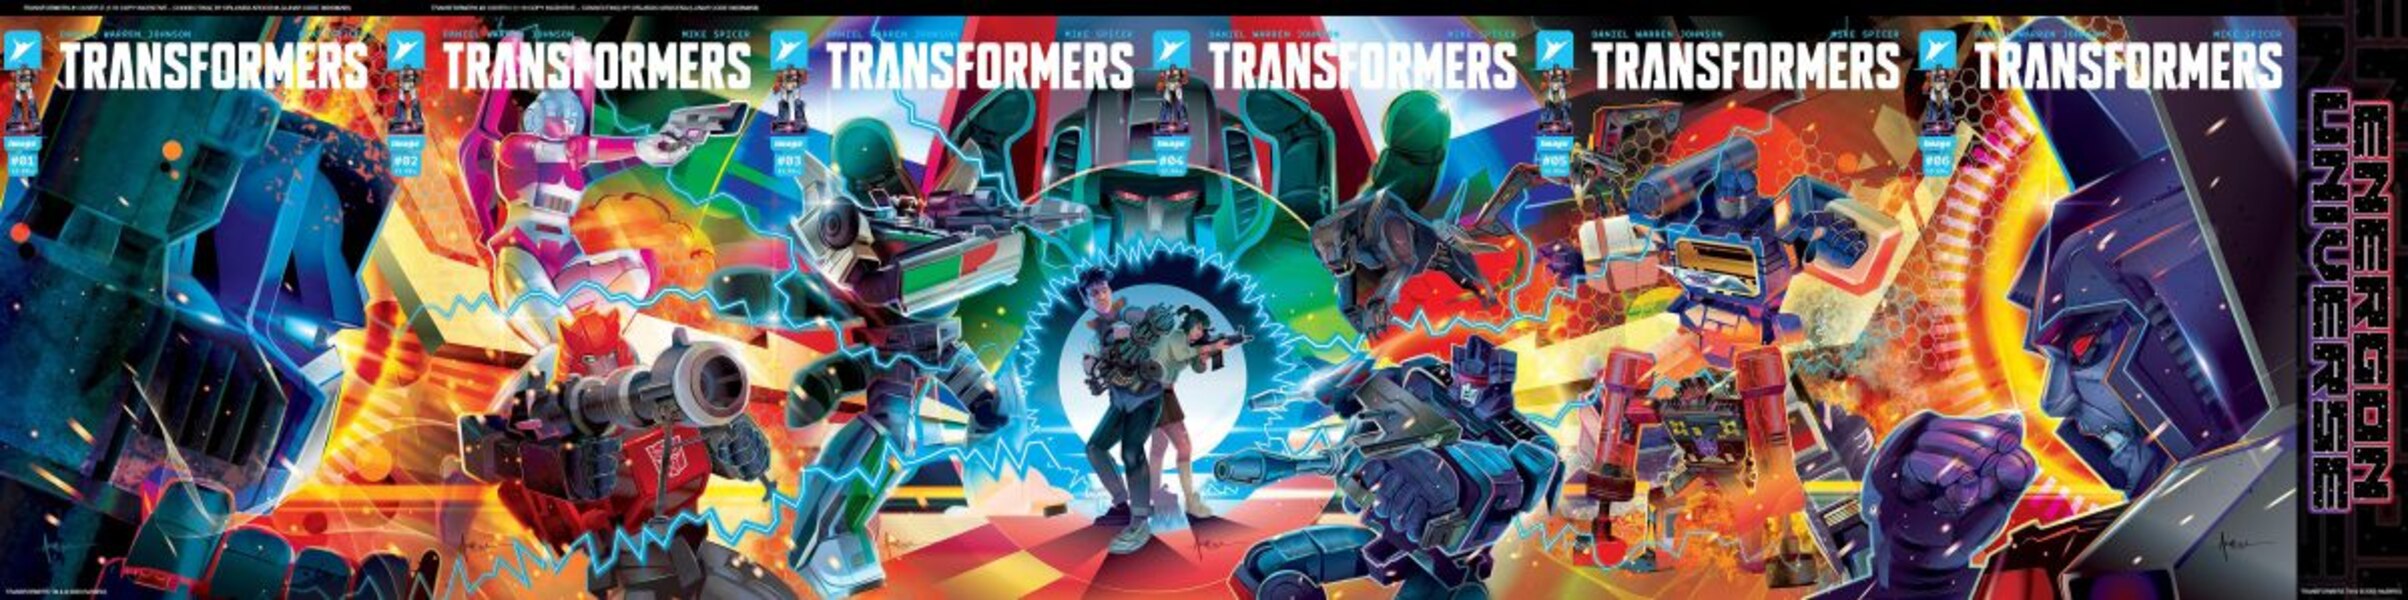 Image Comics Transformers Connected Comic Book Covers 1 6  (7 of 7)